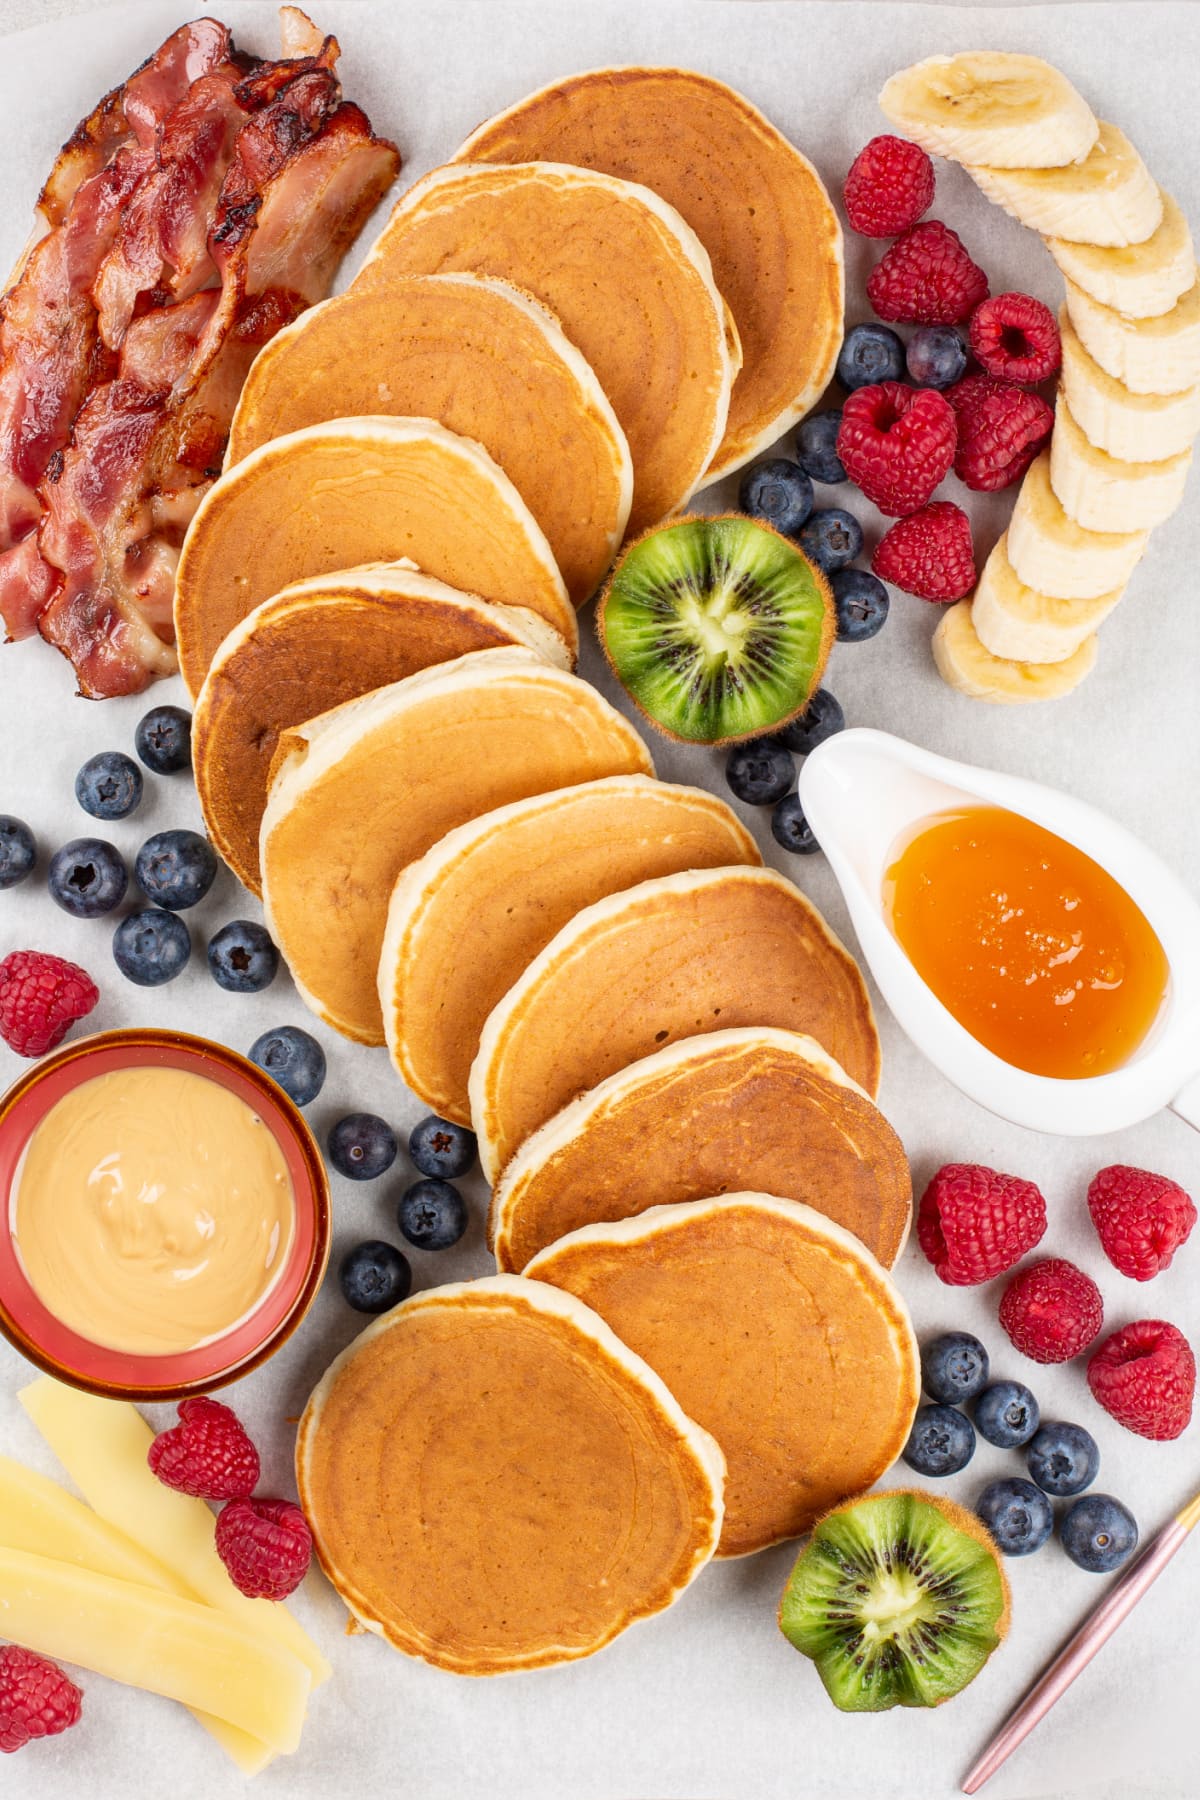 Charcuterie board with pancakes and fruit